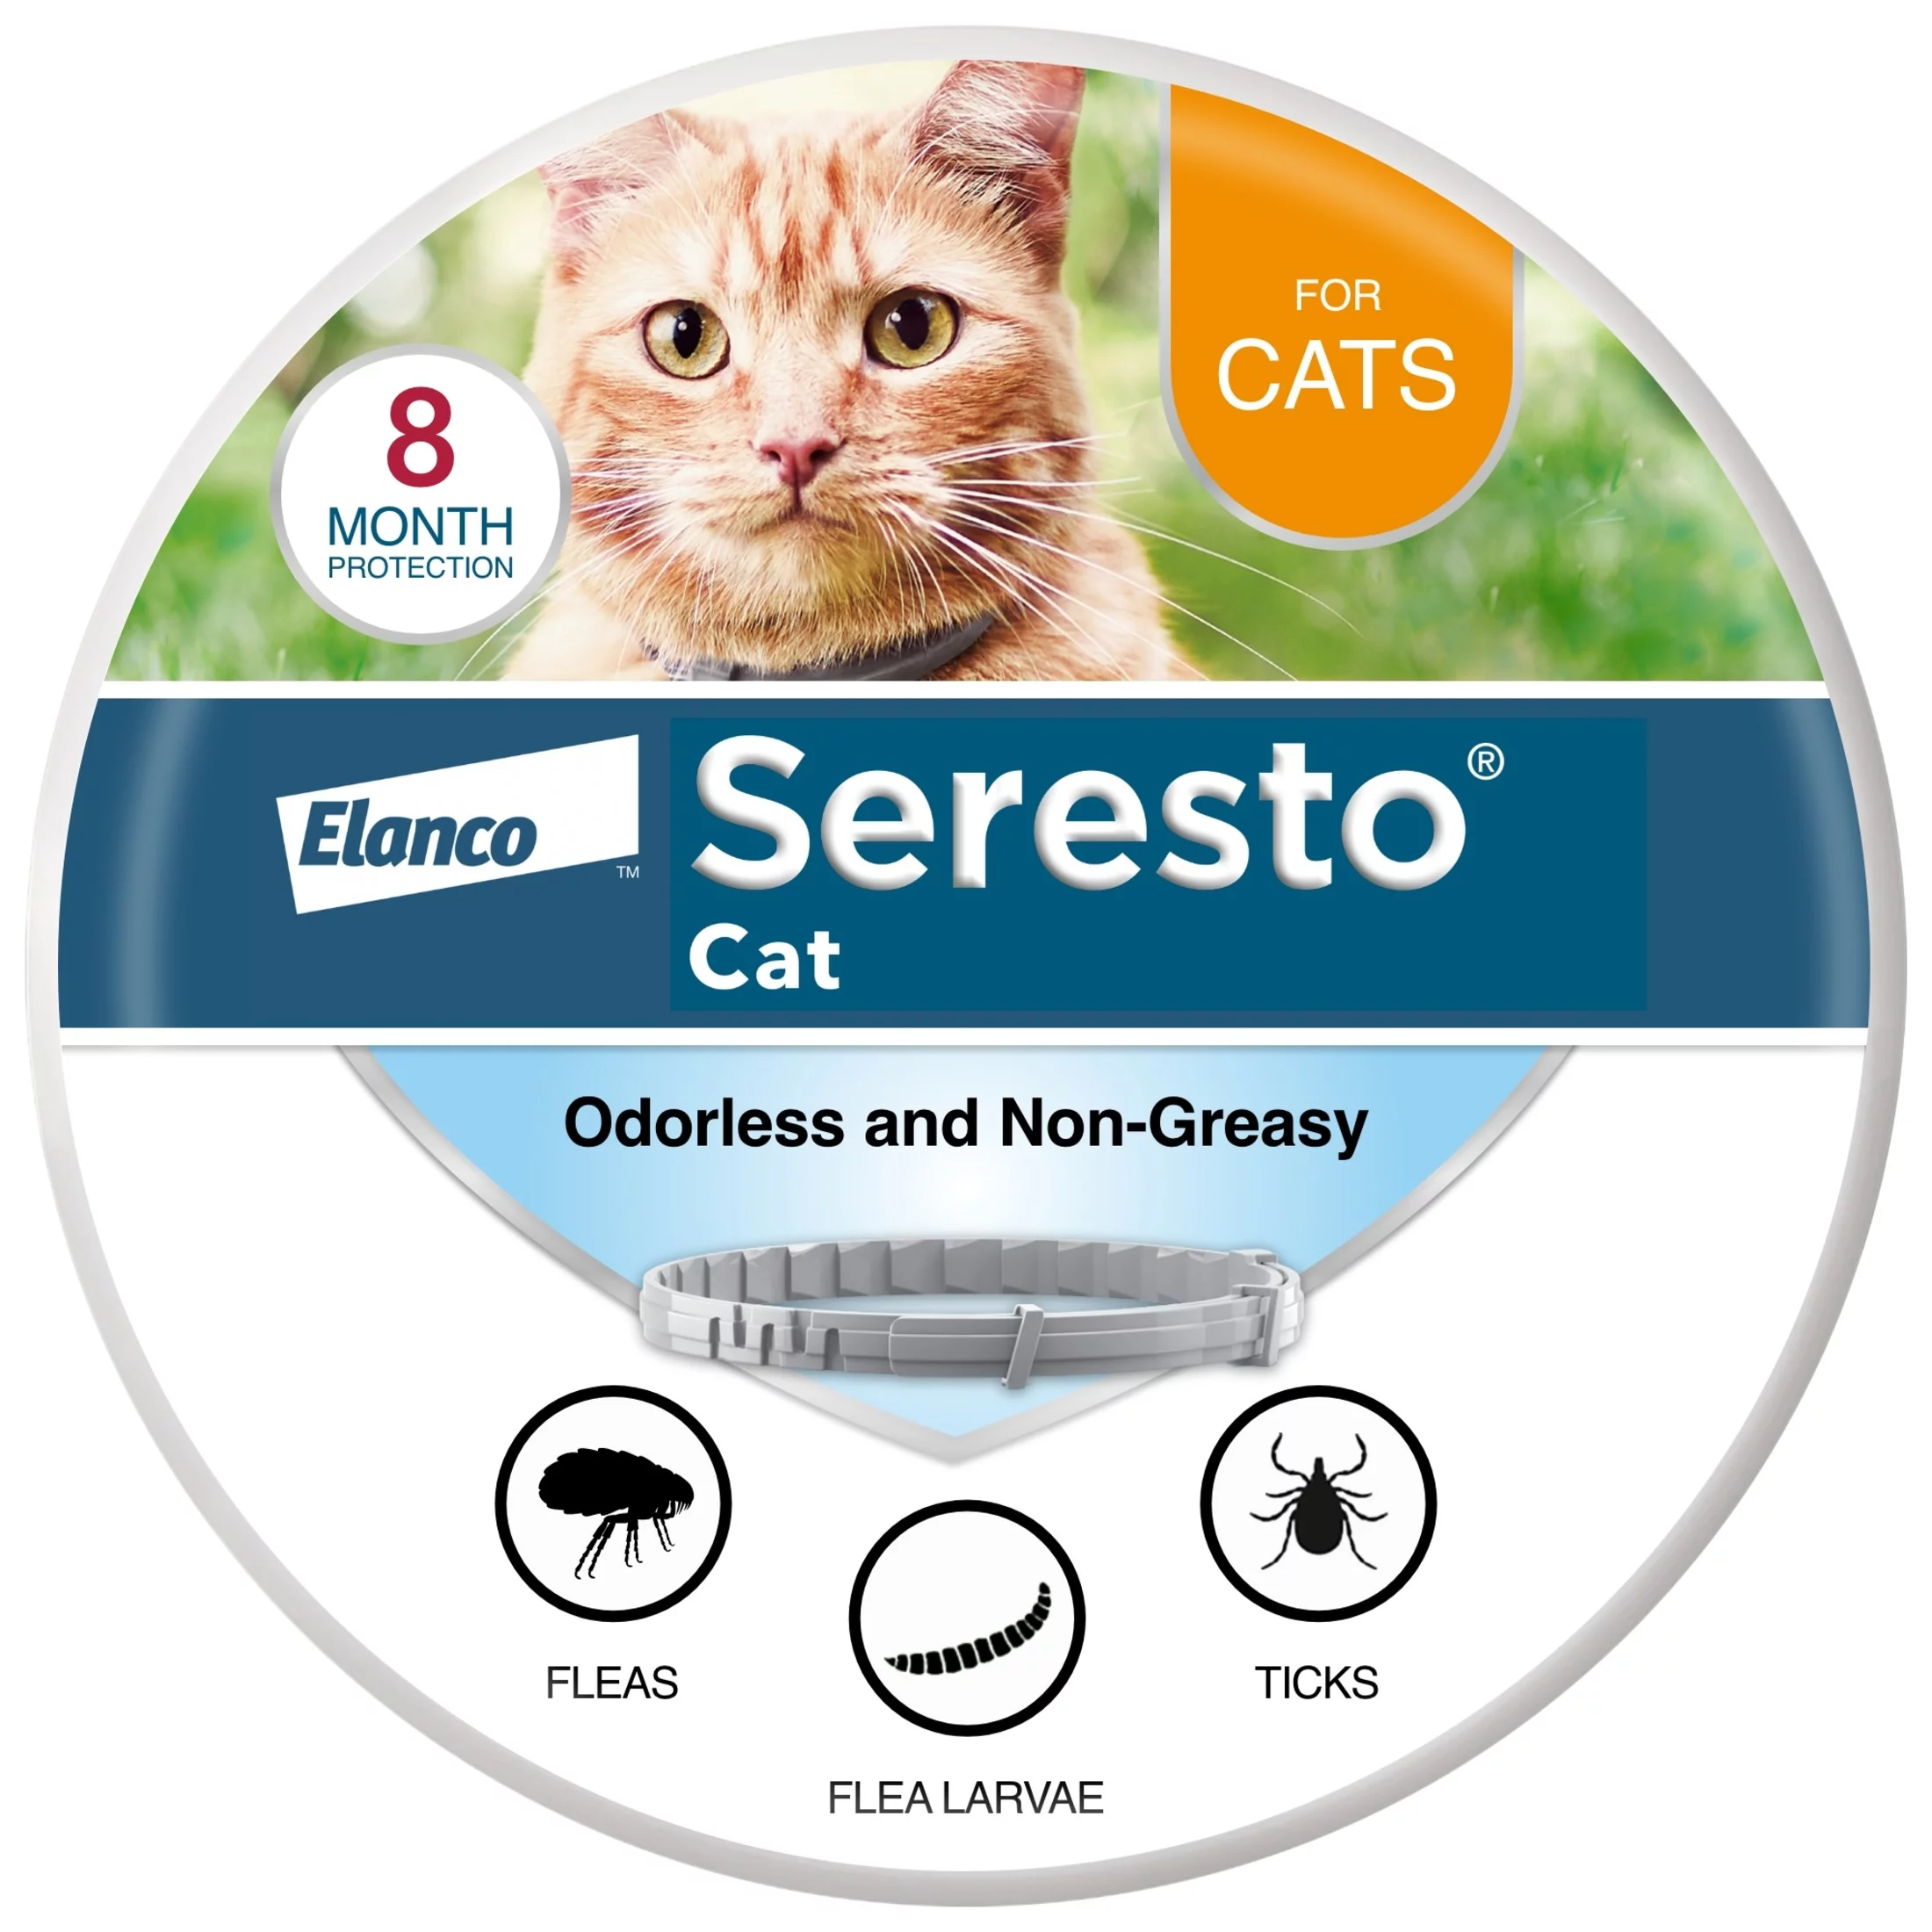 Seresto Cat Vet-Recommended Flea & Tick Prevention 8 Month Collar for Cats